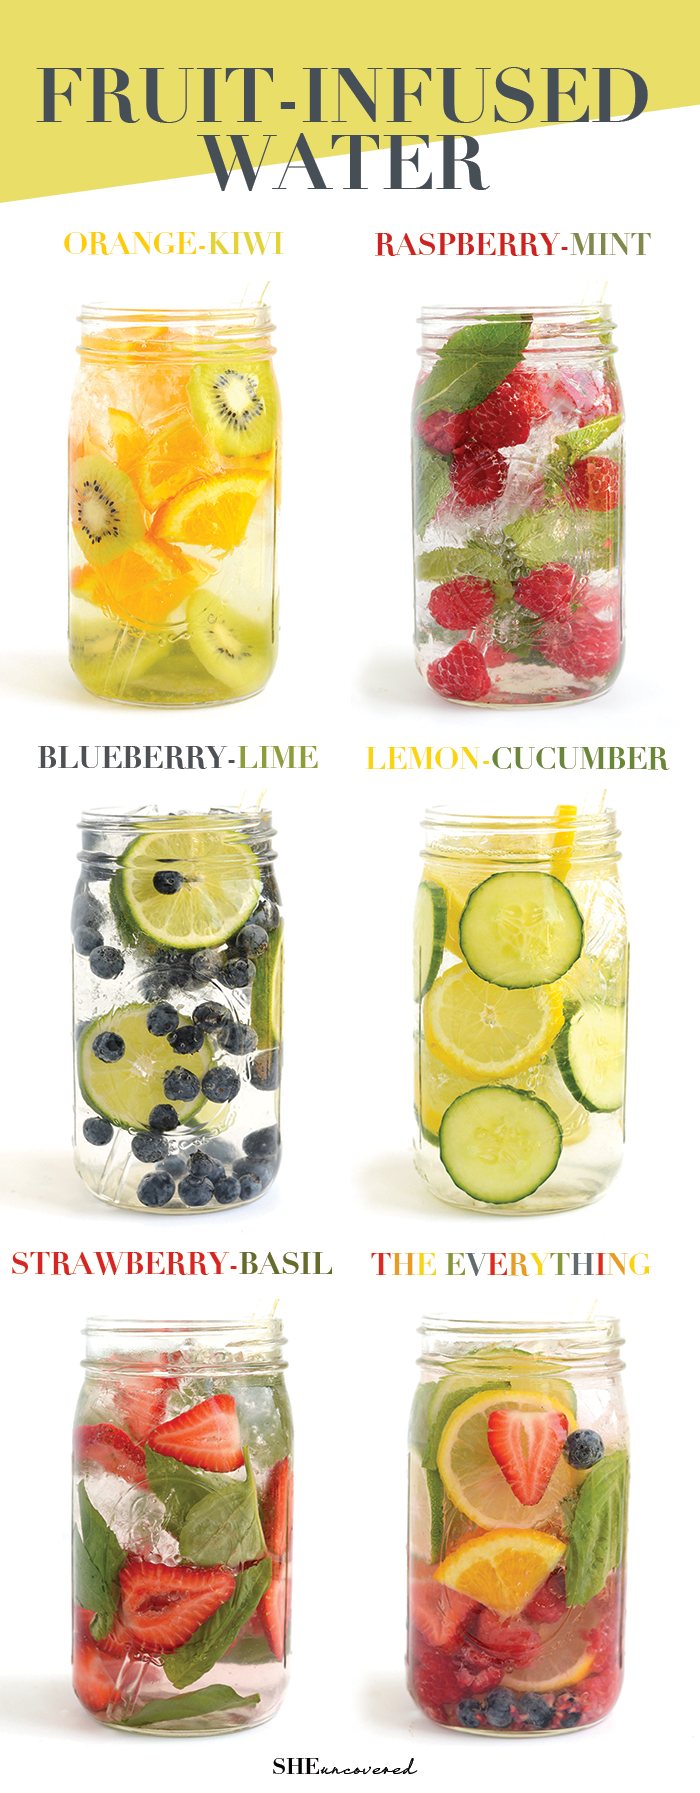 Fruit-infused-water1